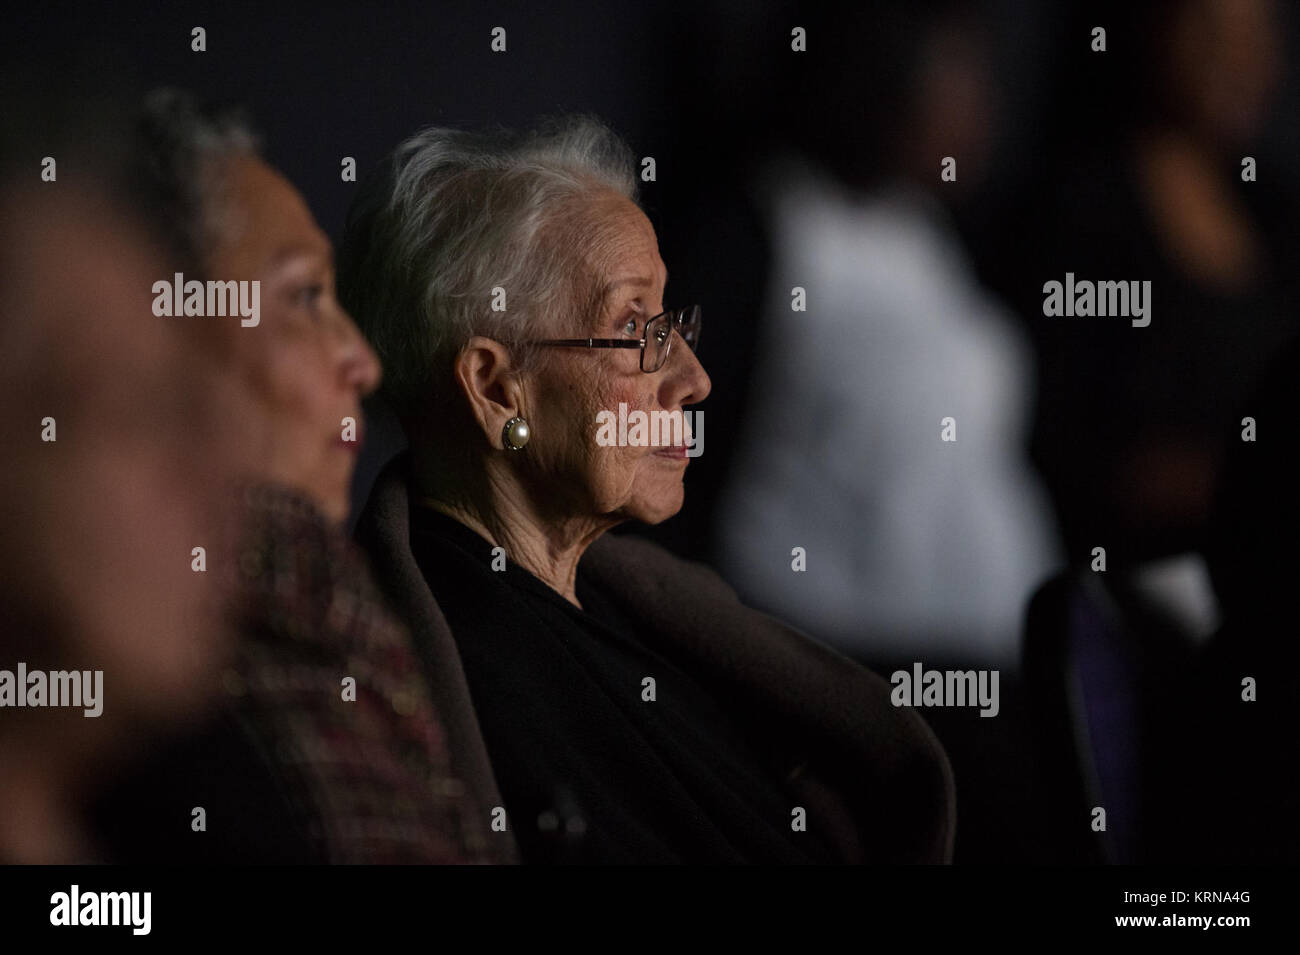 NASA 'human computer' Katherine Johnson watches the premiere of 'Hidden Figures' after a reception where she was honored along with other members of the segregated West Area Computers division of Langley Research Center, on Thursday, Dec. 1, 2016, at the Virginia Air and Space Center in Hampton, VA. 'Hidden Figures' stars Taraji P. Henson as Katherine Johnson, the African American mathematician, physicist, and space scientist, who calculated flight trajectories for John Glenn's first orbital flight in 1962. Photo Credit: (NASA/Aubrey Gemignani) Hidden Figures Premiere (NHQ201612010035) Stock Photo